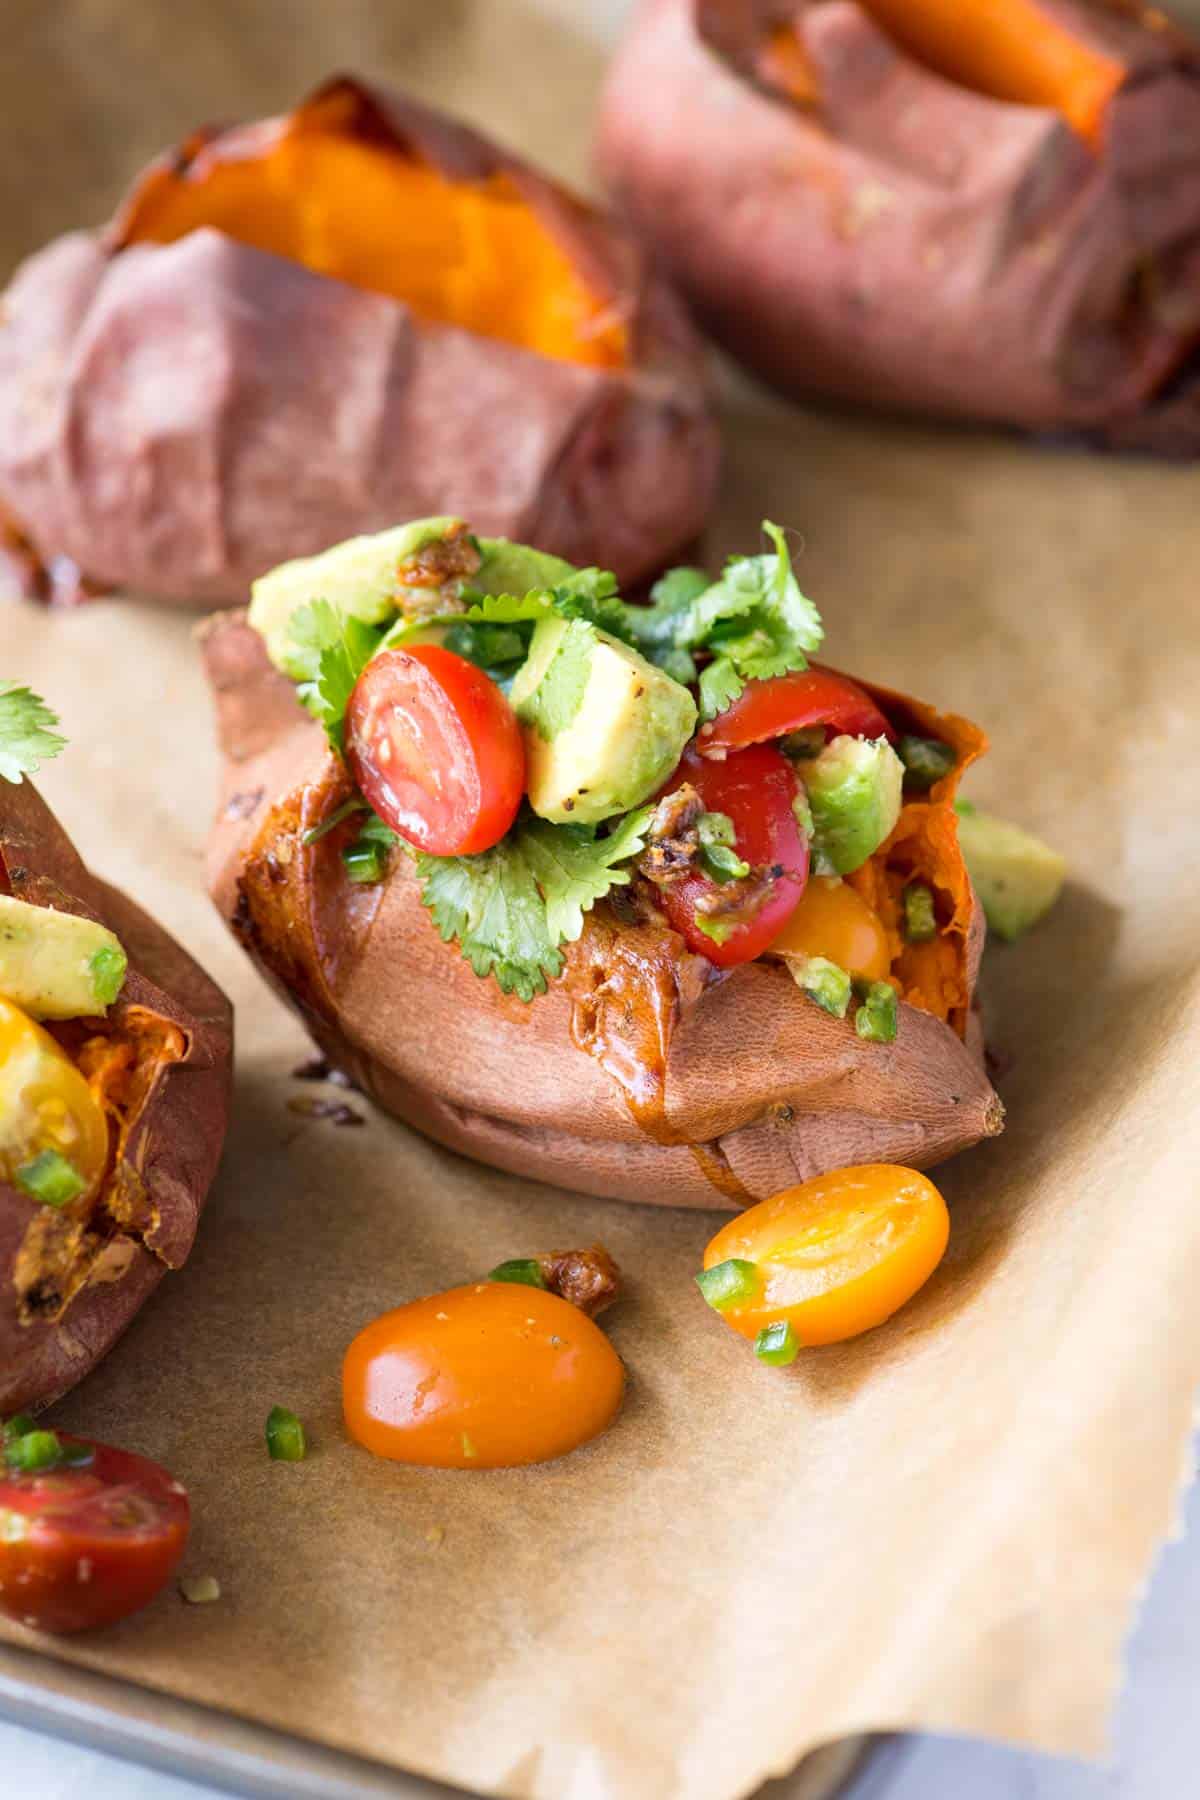 Baked sweet potatoes stuffed with roasted garlic, avocado and tomato salsa (delicious, vegetarian and vegan). 